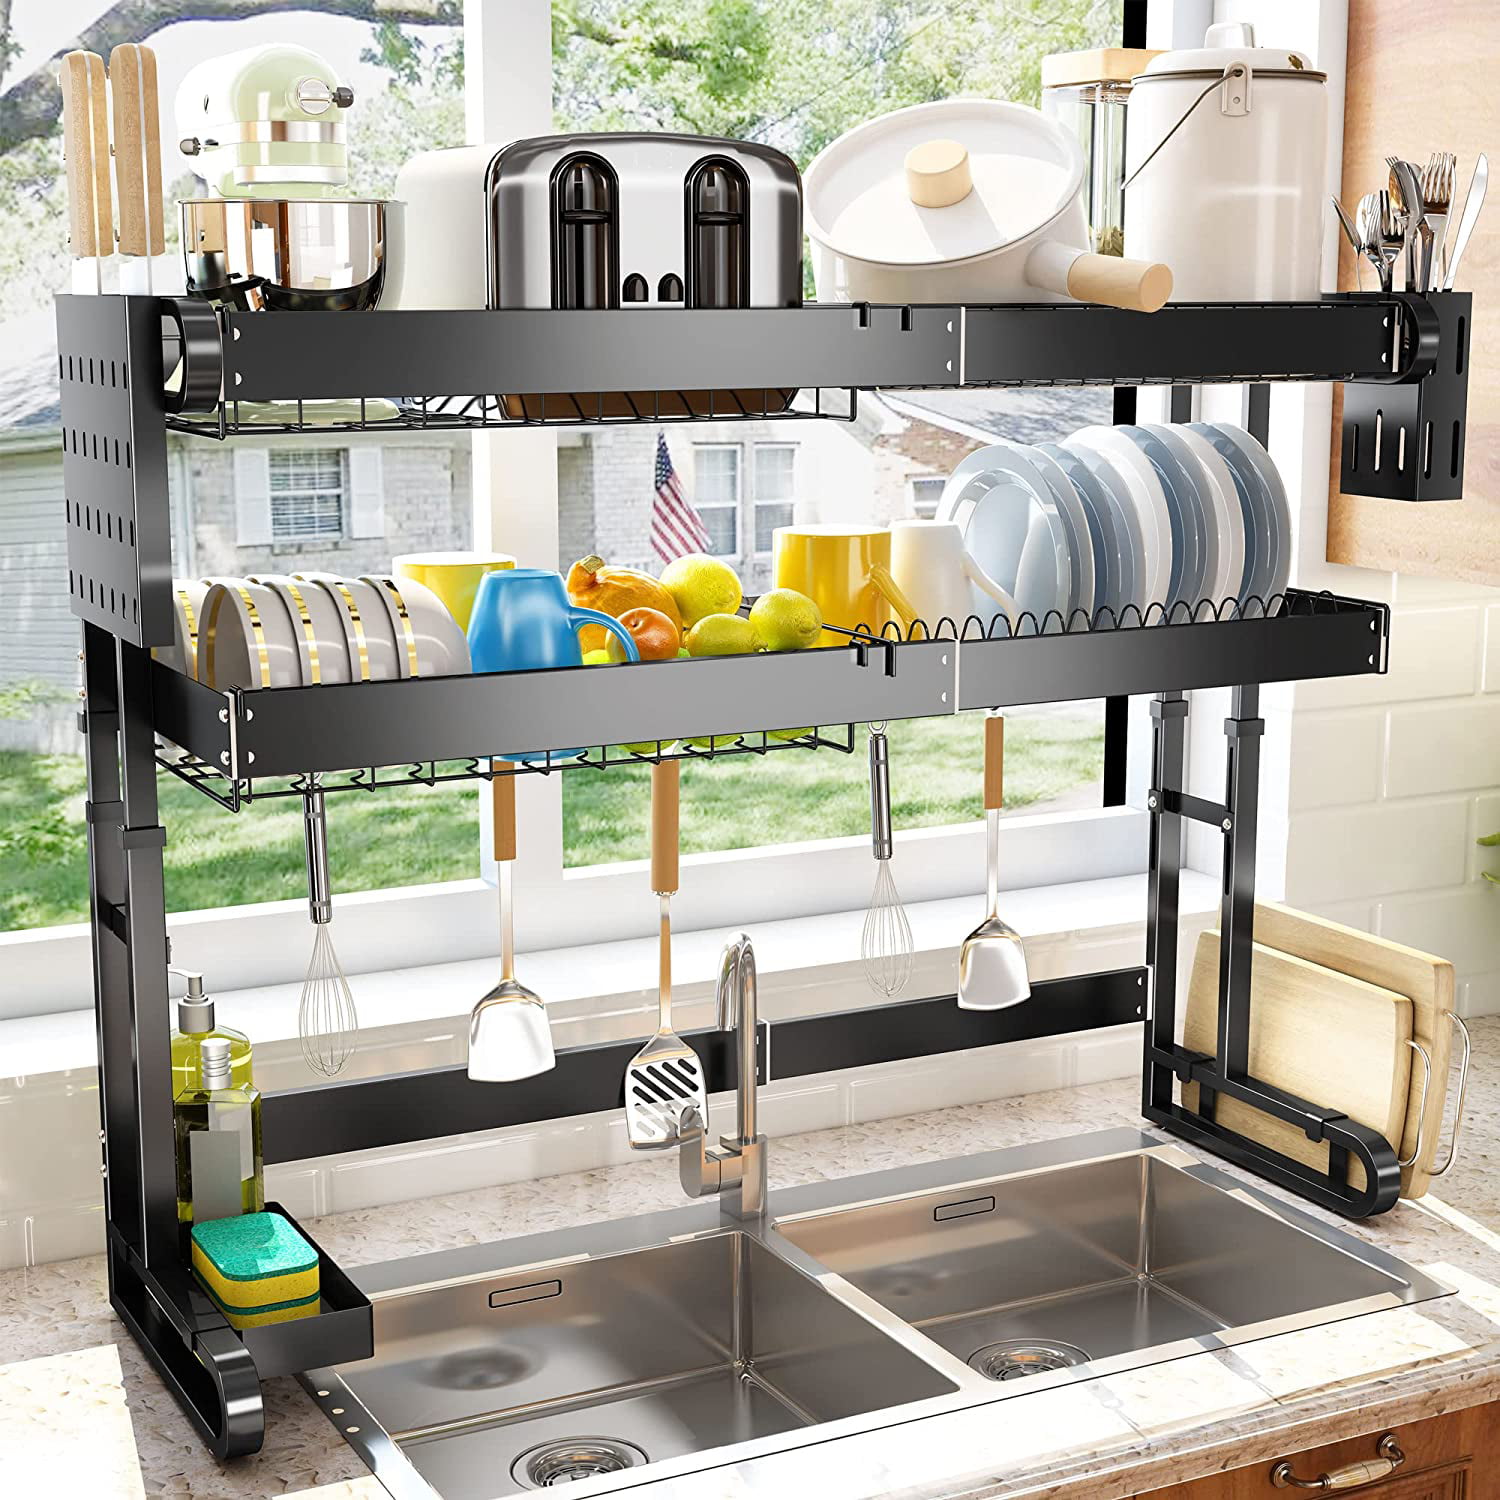 SAYZH Dish Drying Rack, Over The Sink Dish Drying Rack Length